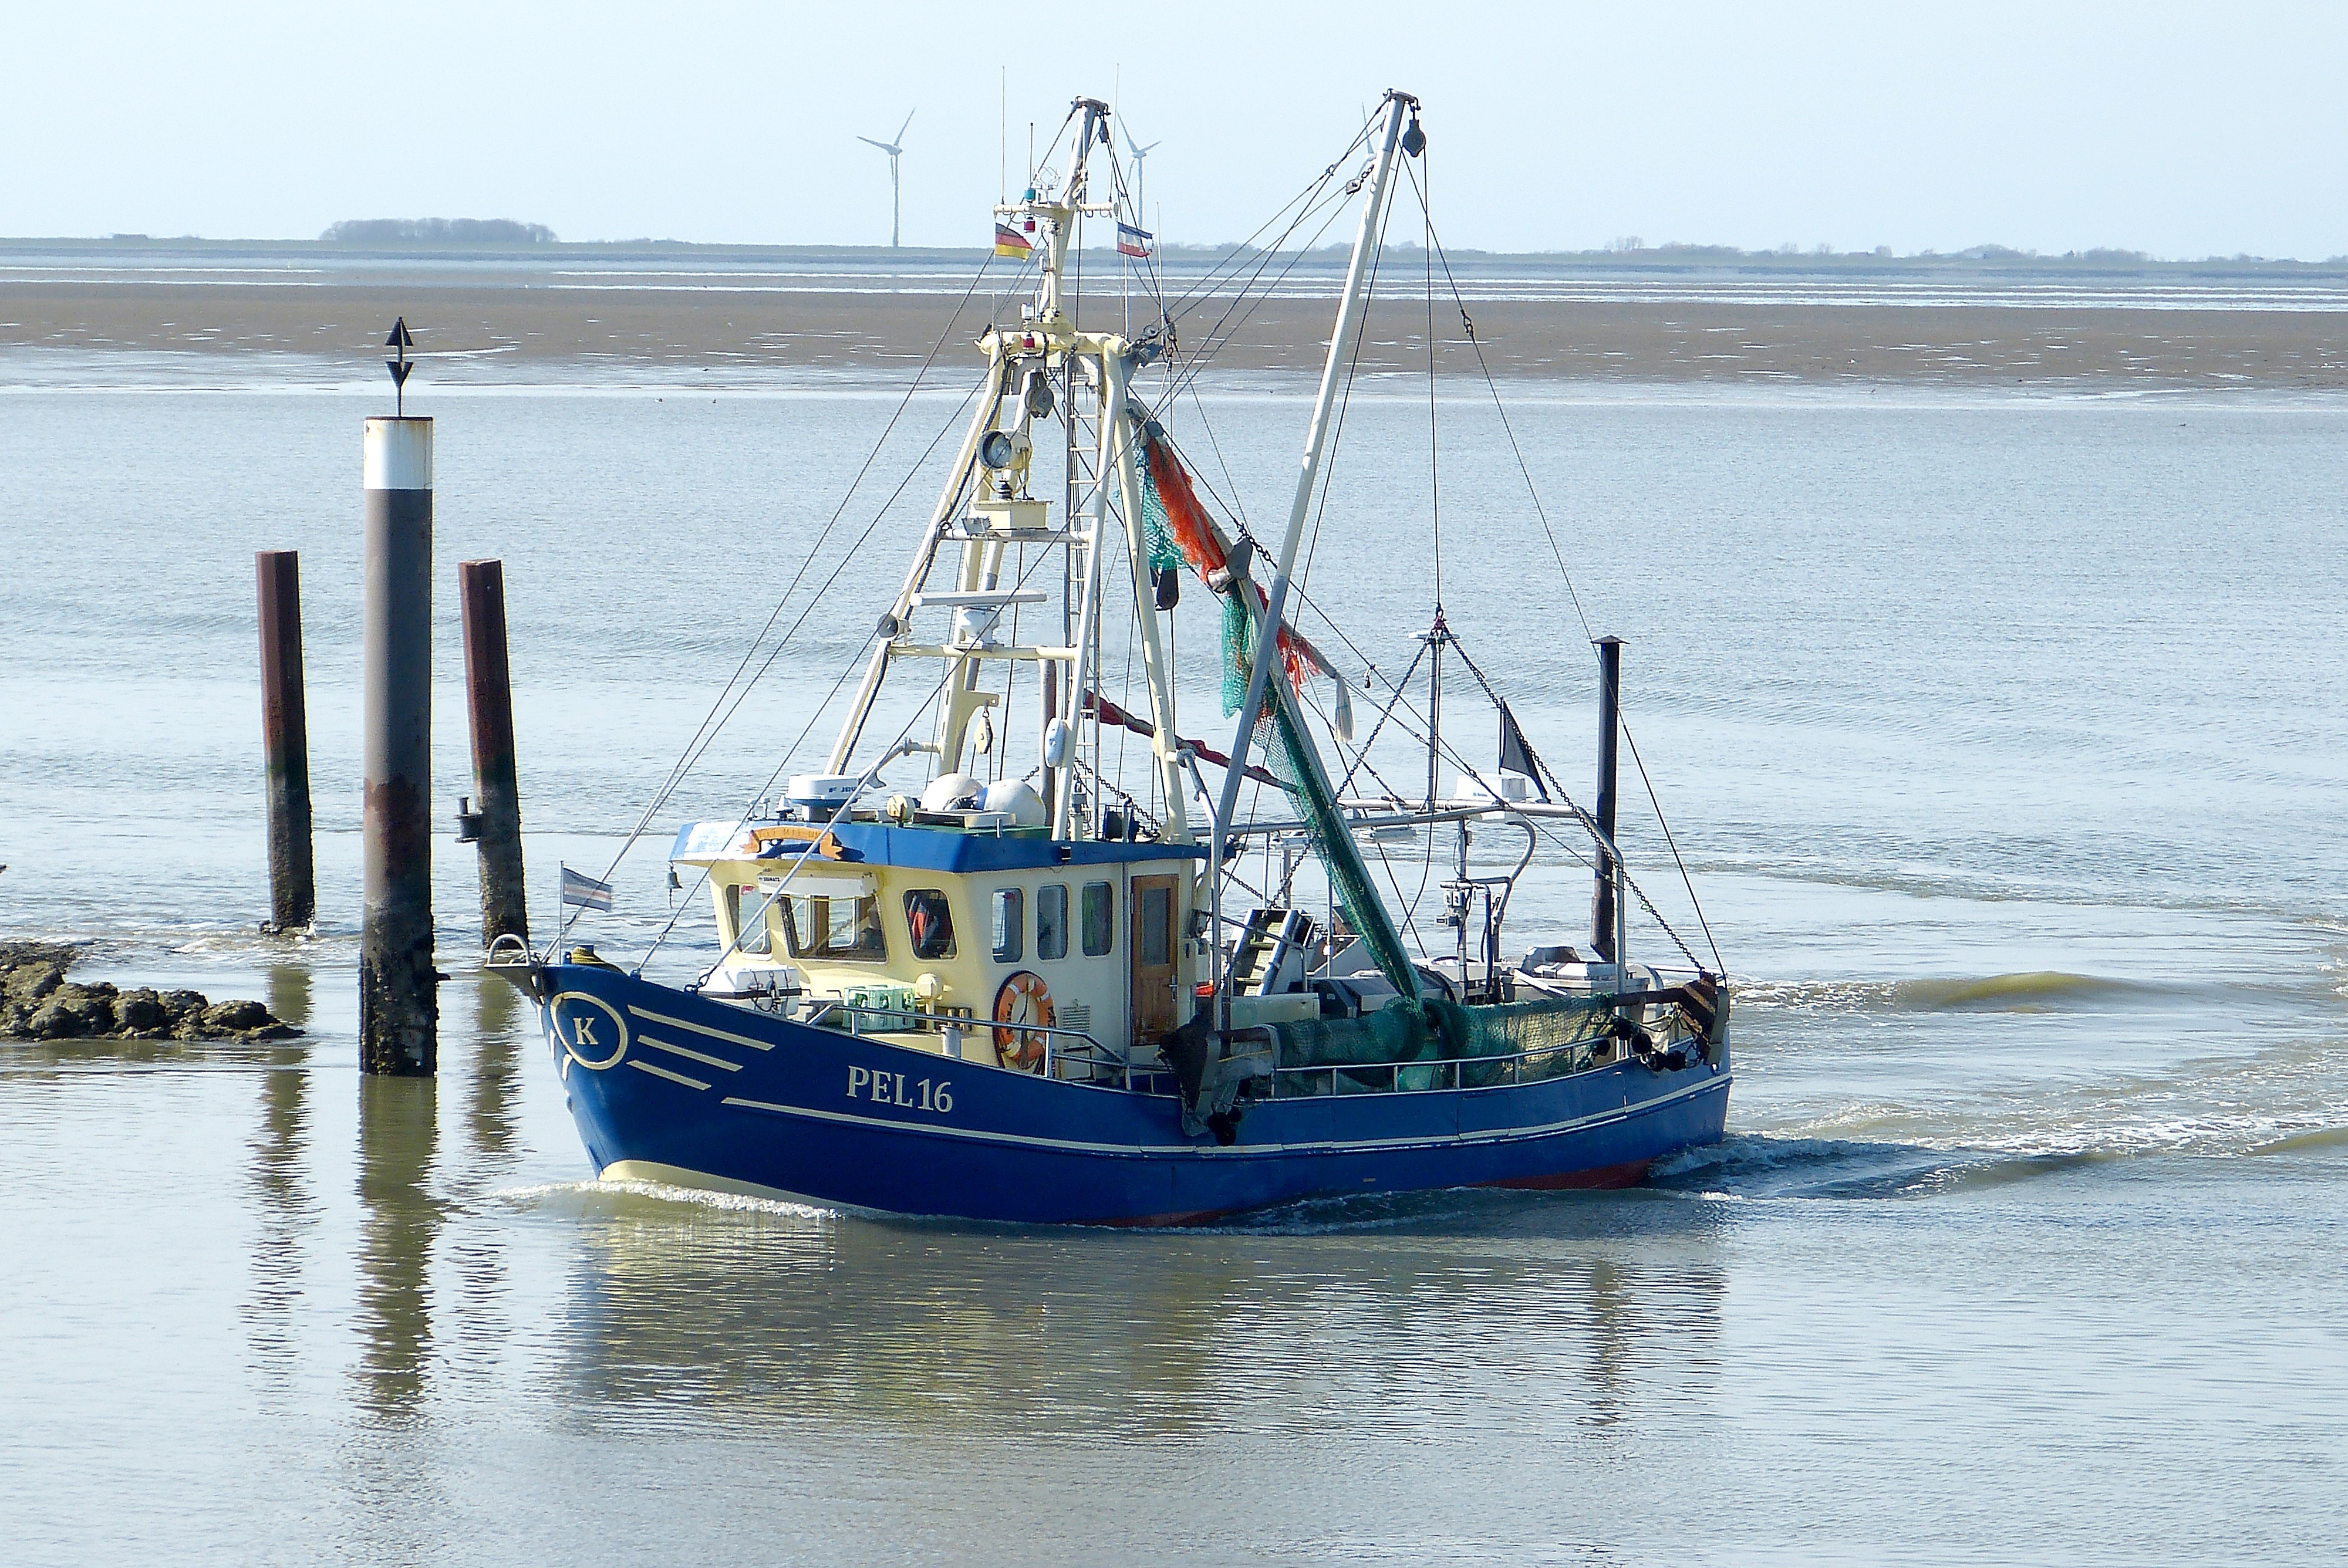 blue and white fishing boat on body of water near brown wooden post